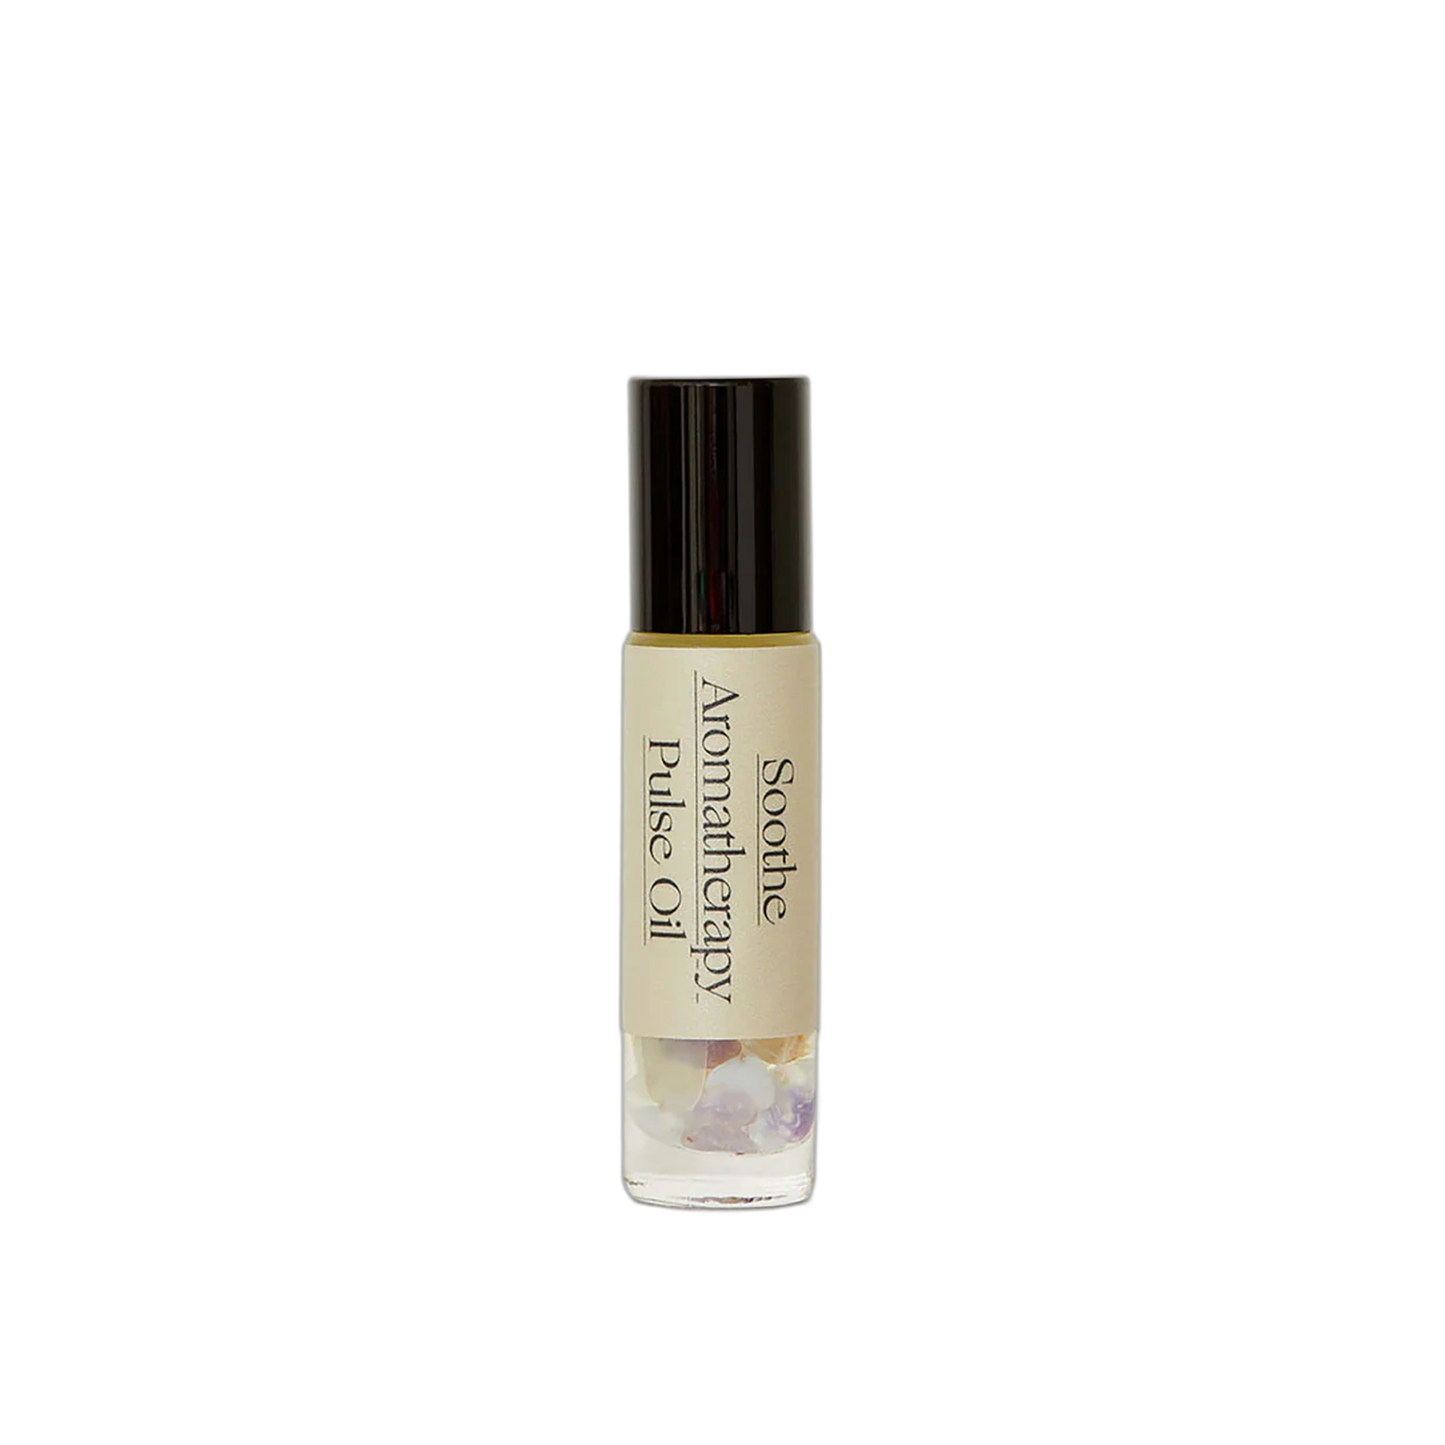 Soothe Aromatherapy Pulse Oil 10ml